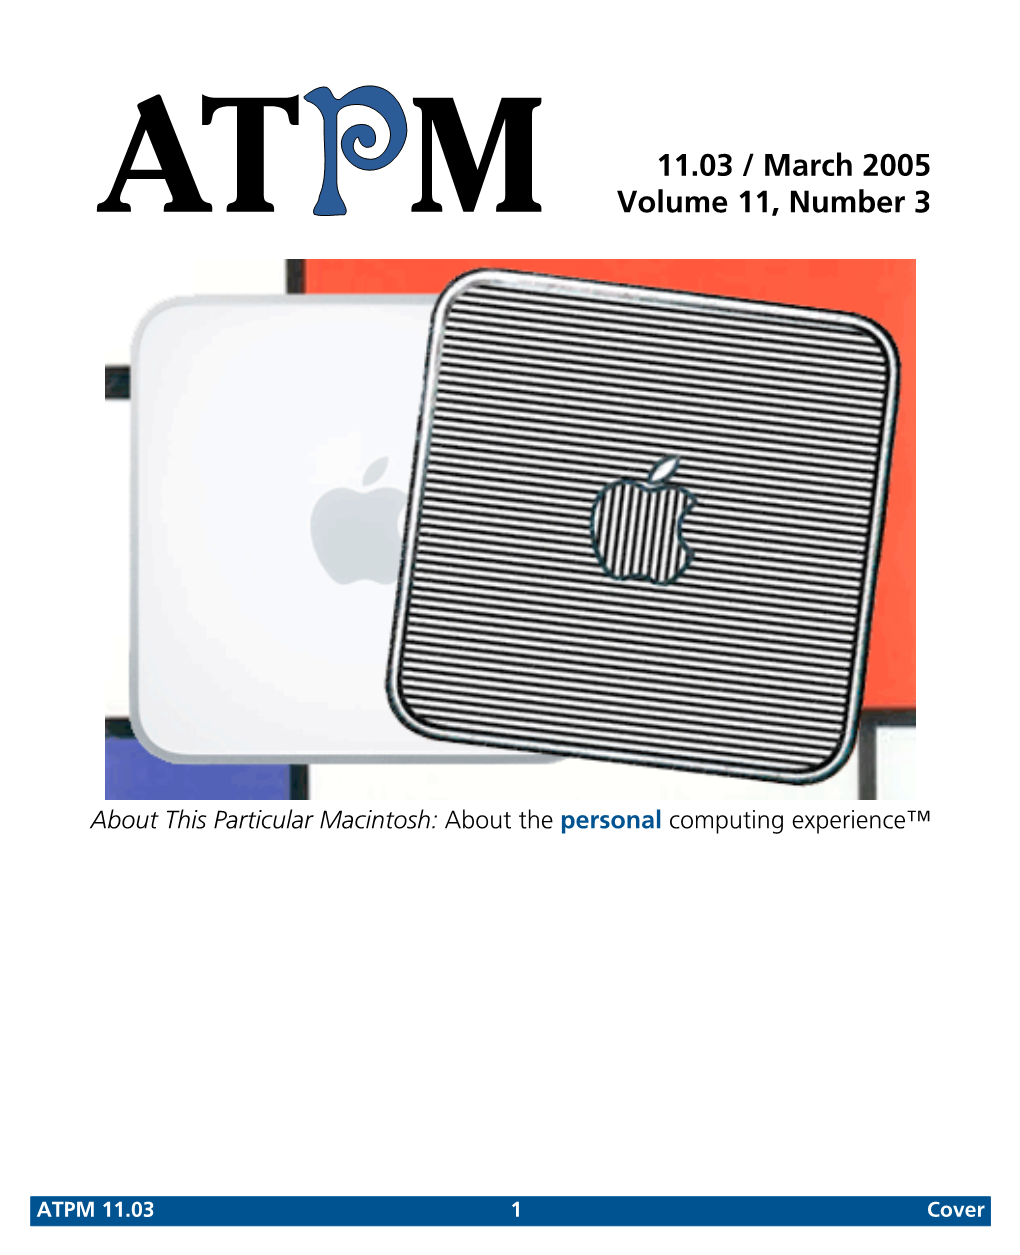 About This Particular Macintosh 11.03